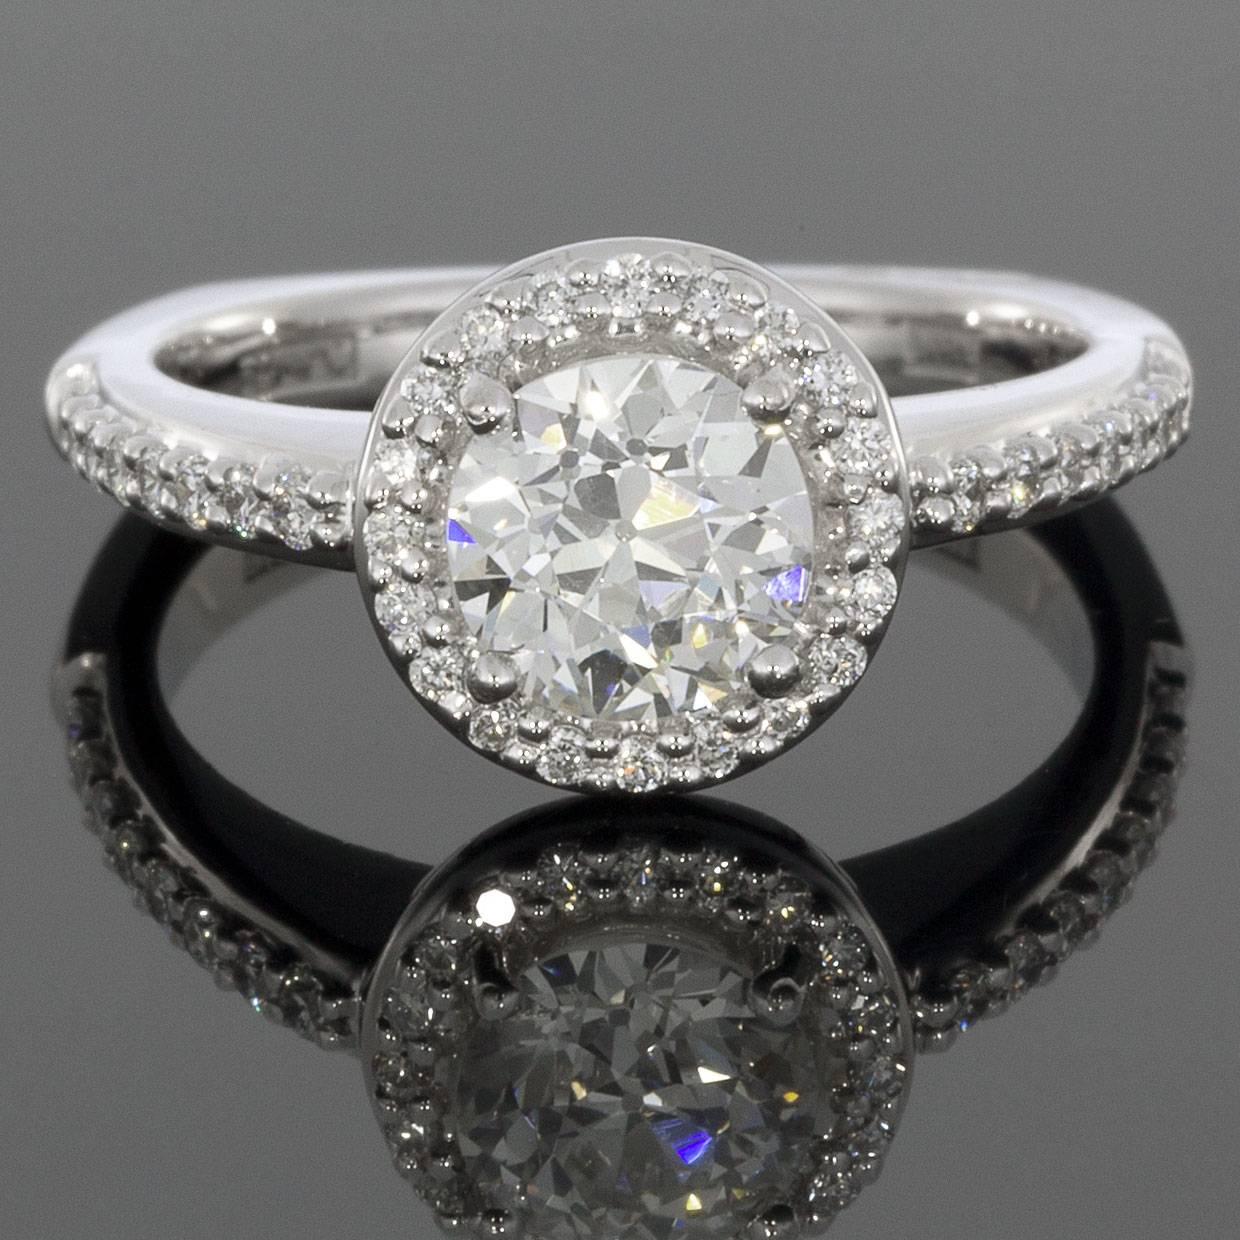 This beautiful wedding set is absolutely radiant in the shine of white gold! Sure to render her speechless, the engagement ring features a 1.0 carat round brilliant cut center diamond that is GIA certified and H/VS1 in quality. This lovely center